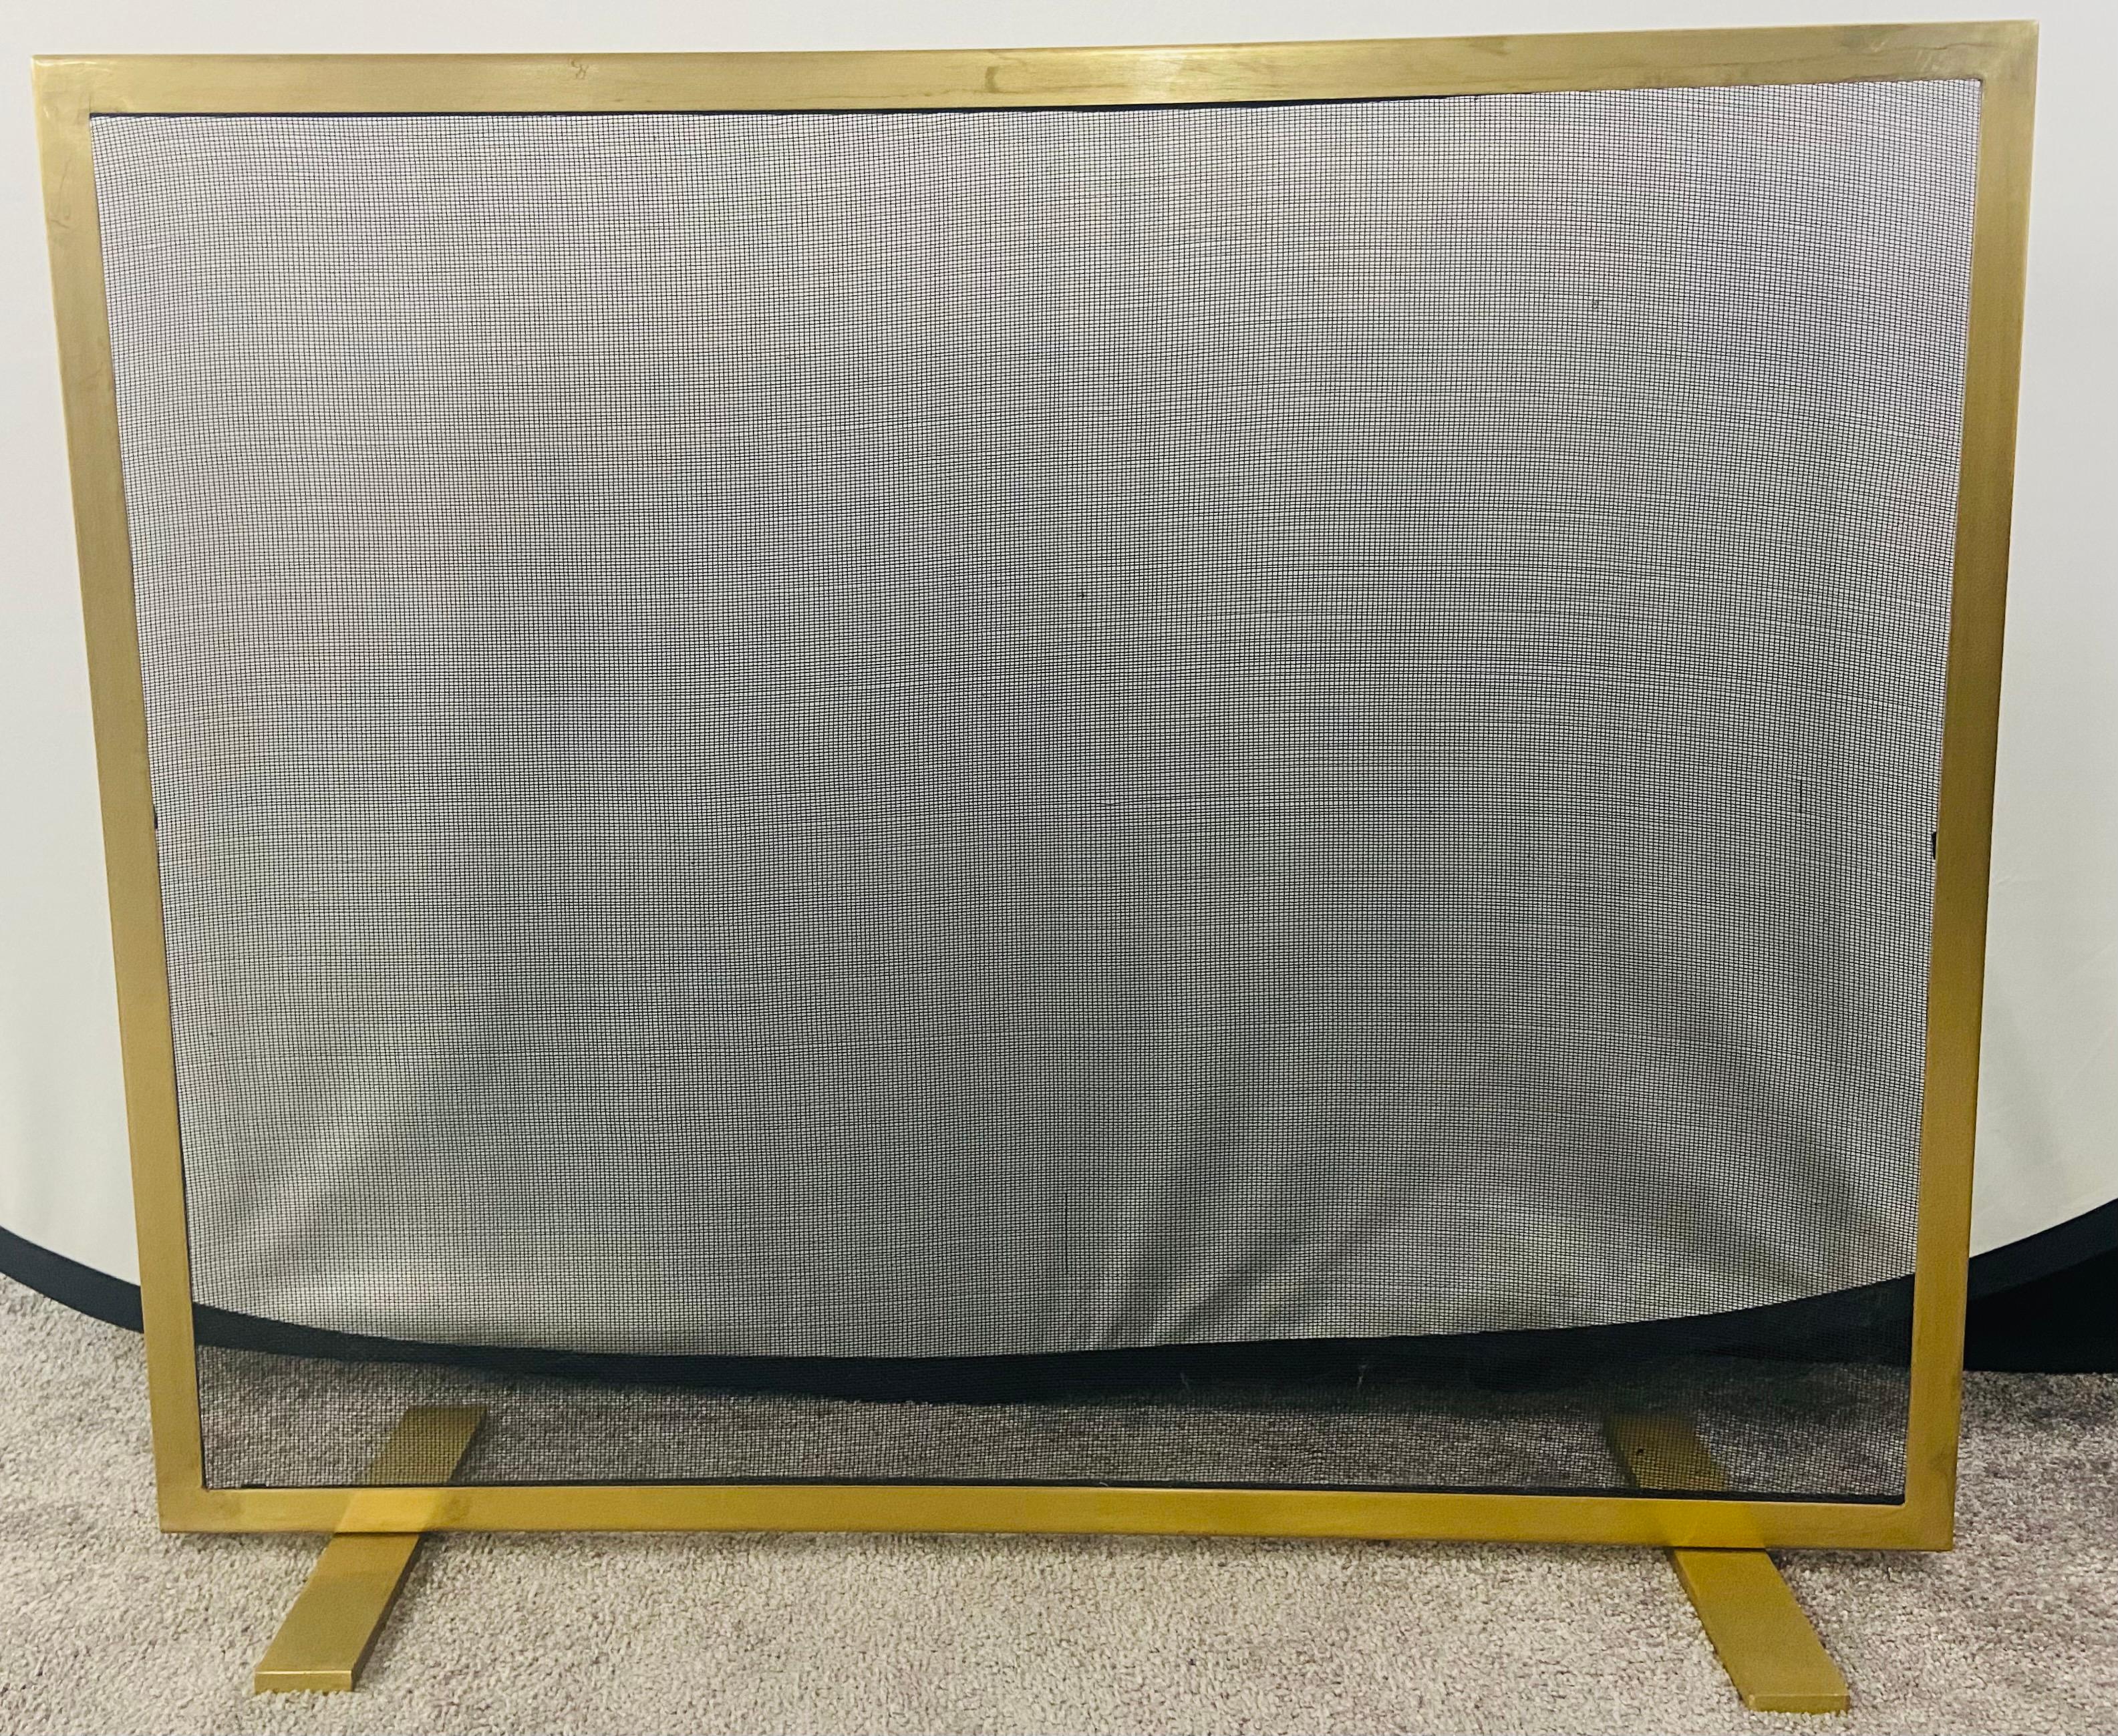 A stylish Modern custom made fire screen featuring a rectangular shape and hand-carved of high quality brass and black iron mesh. The screen is elevated by rectangular brass feet, all in the same color. Elegant and simplistic, this modernist fire